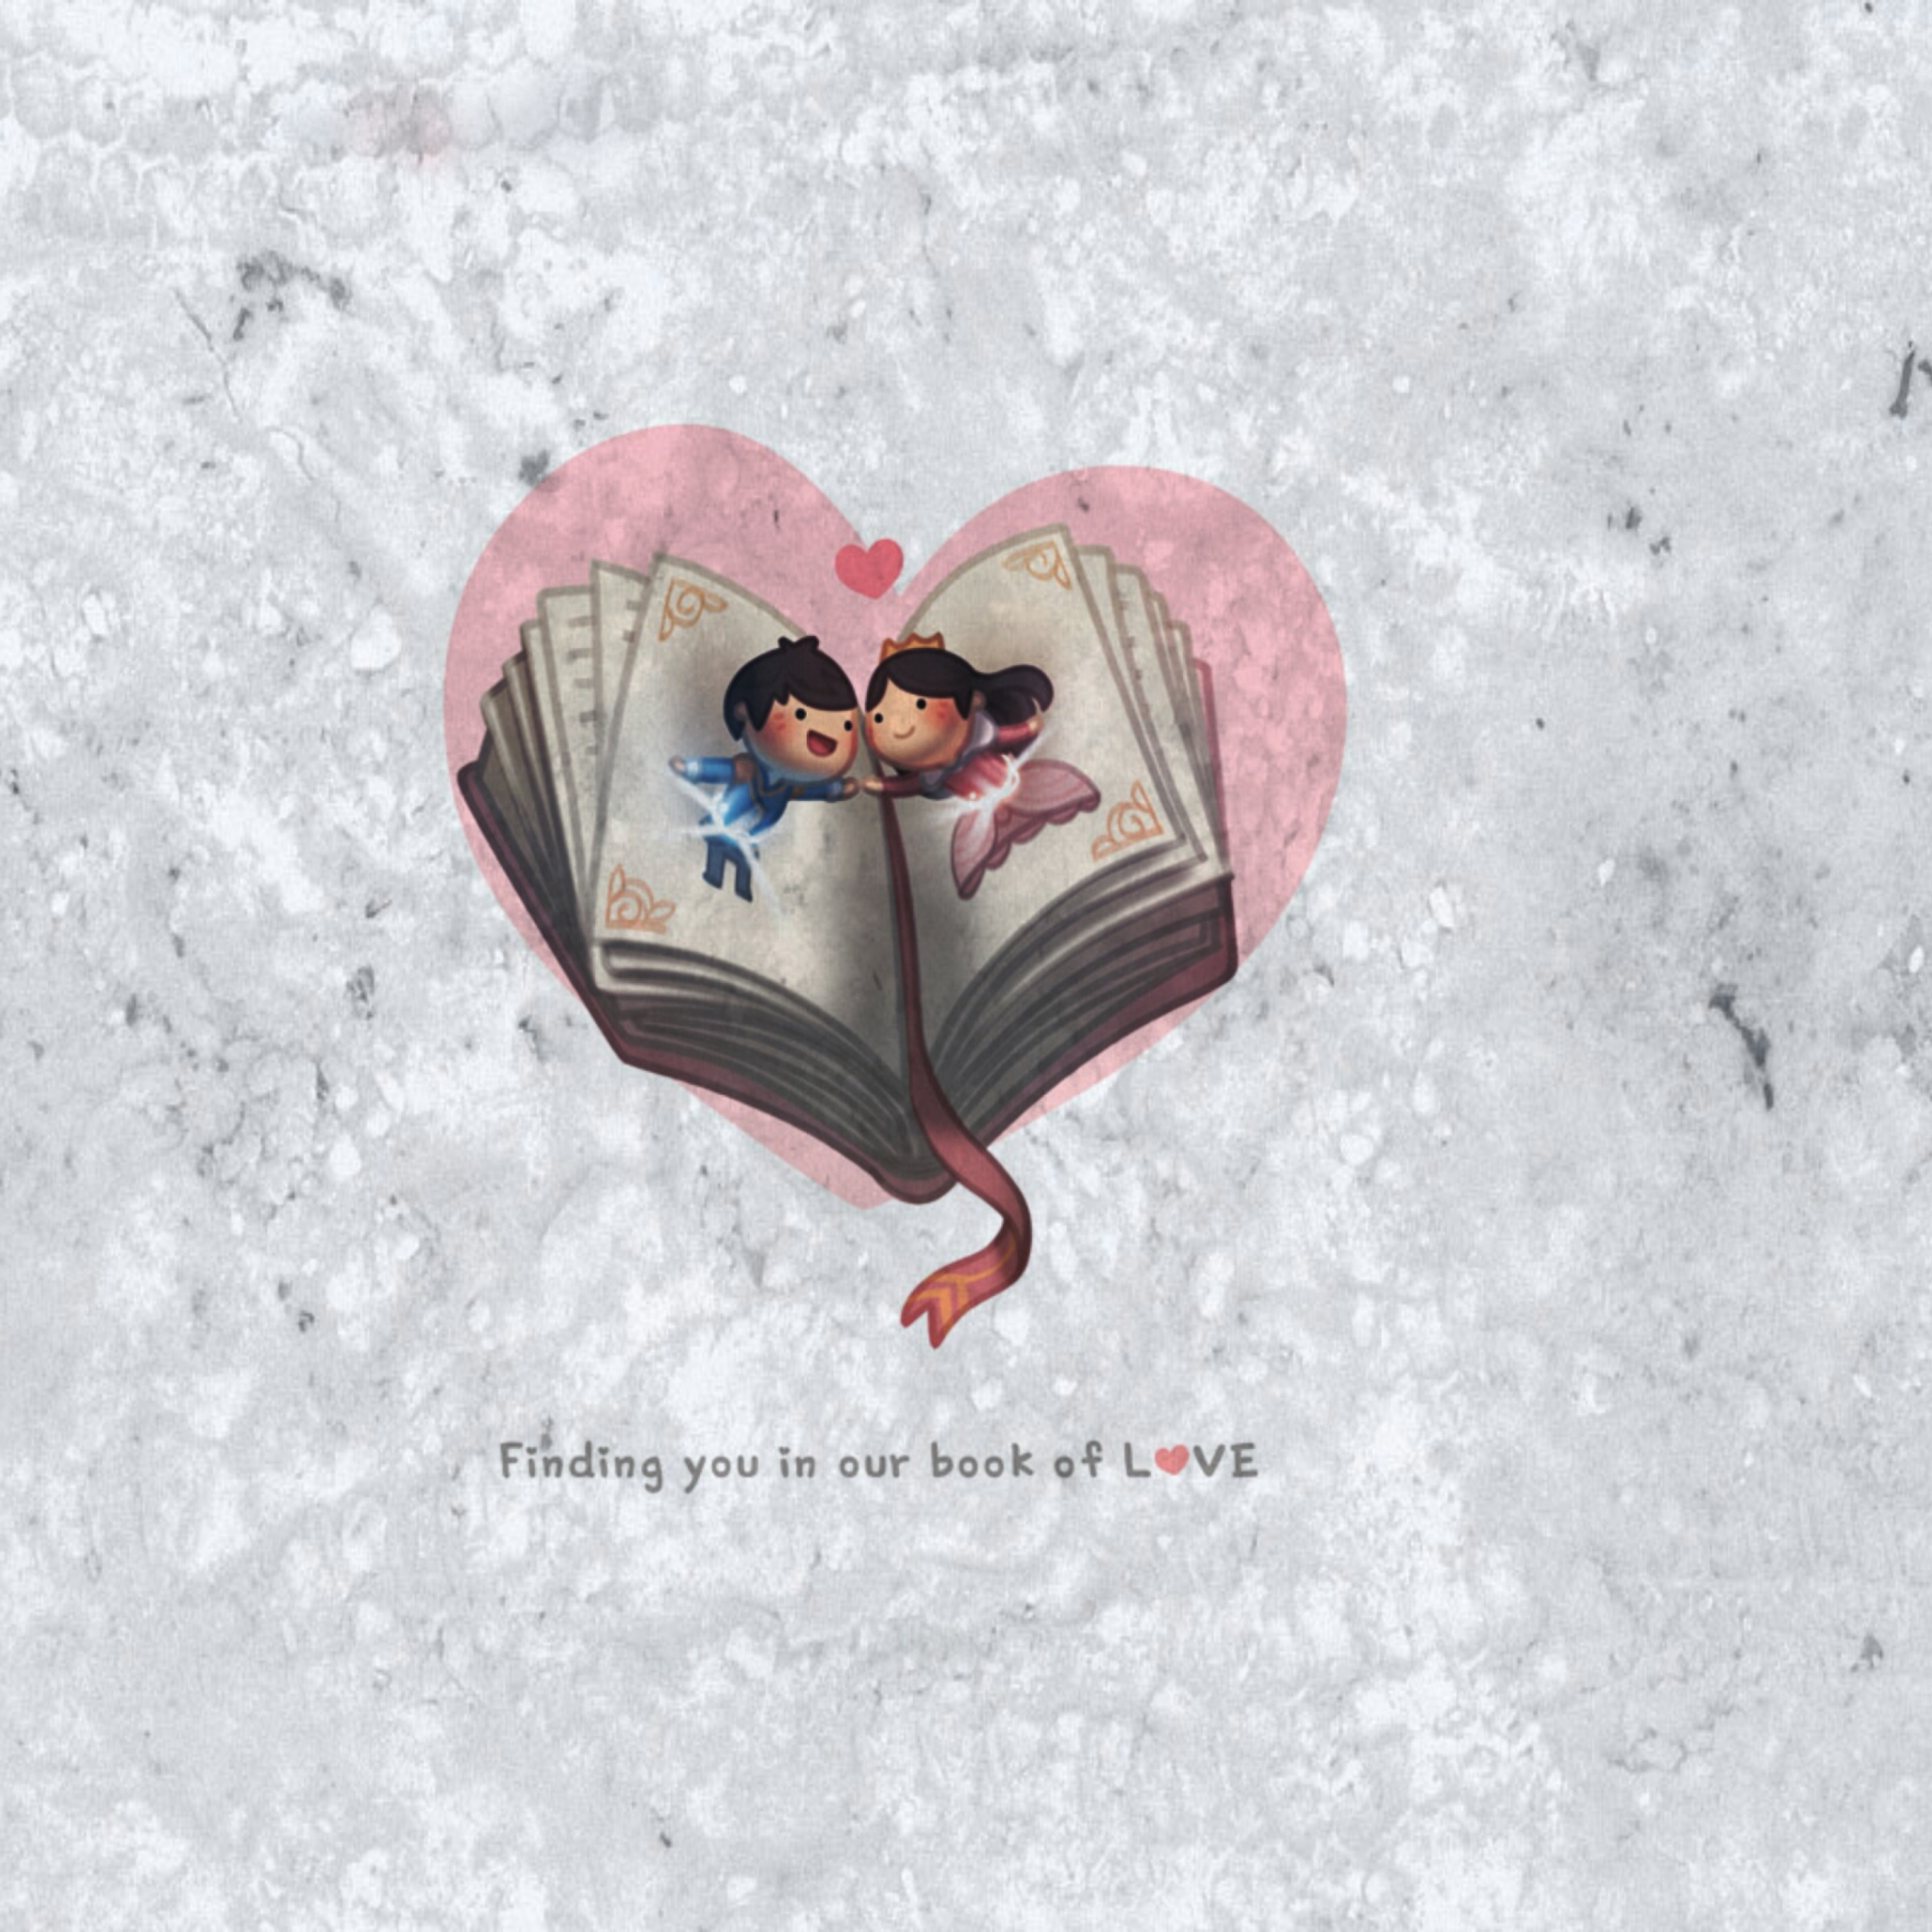 Love Is Finding You In Our Book Of Love wallpaper 2048x2048